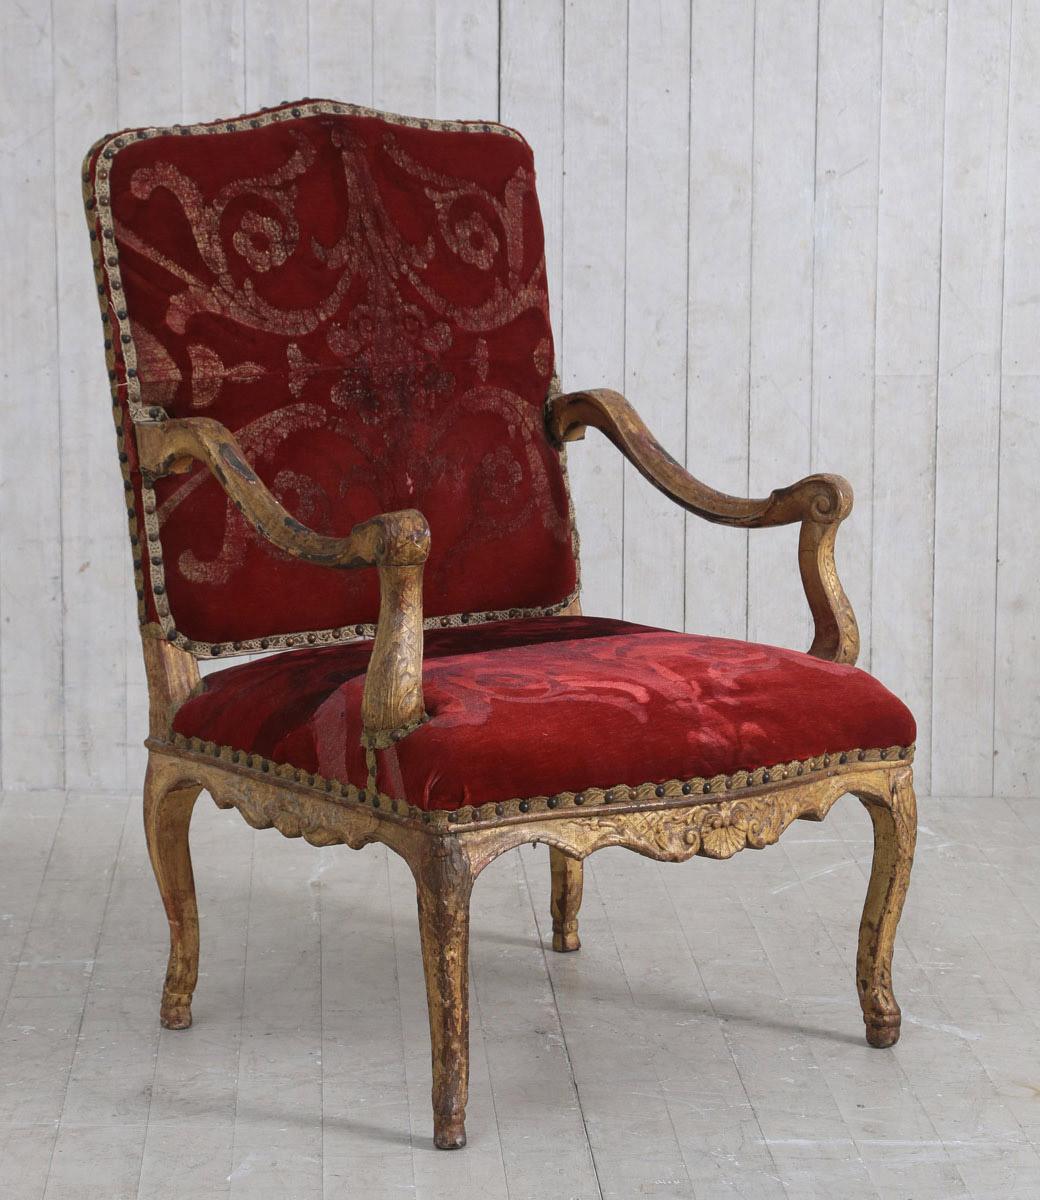 Régence 18th Century French Carved Gilded Regence Chair with Original Tapestry Fabric For Sale